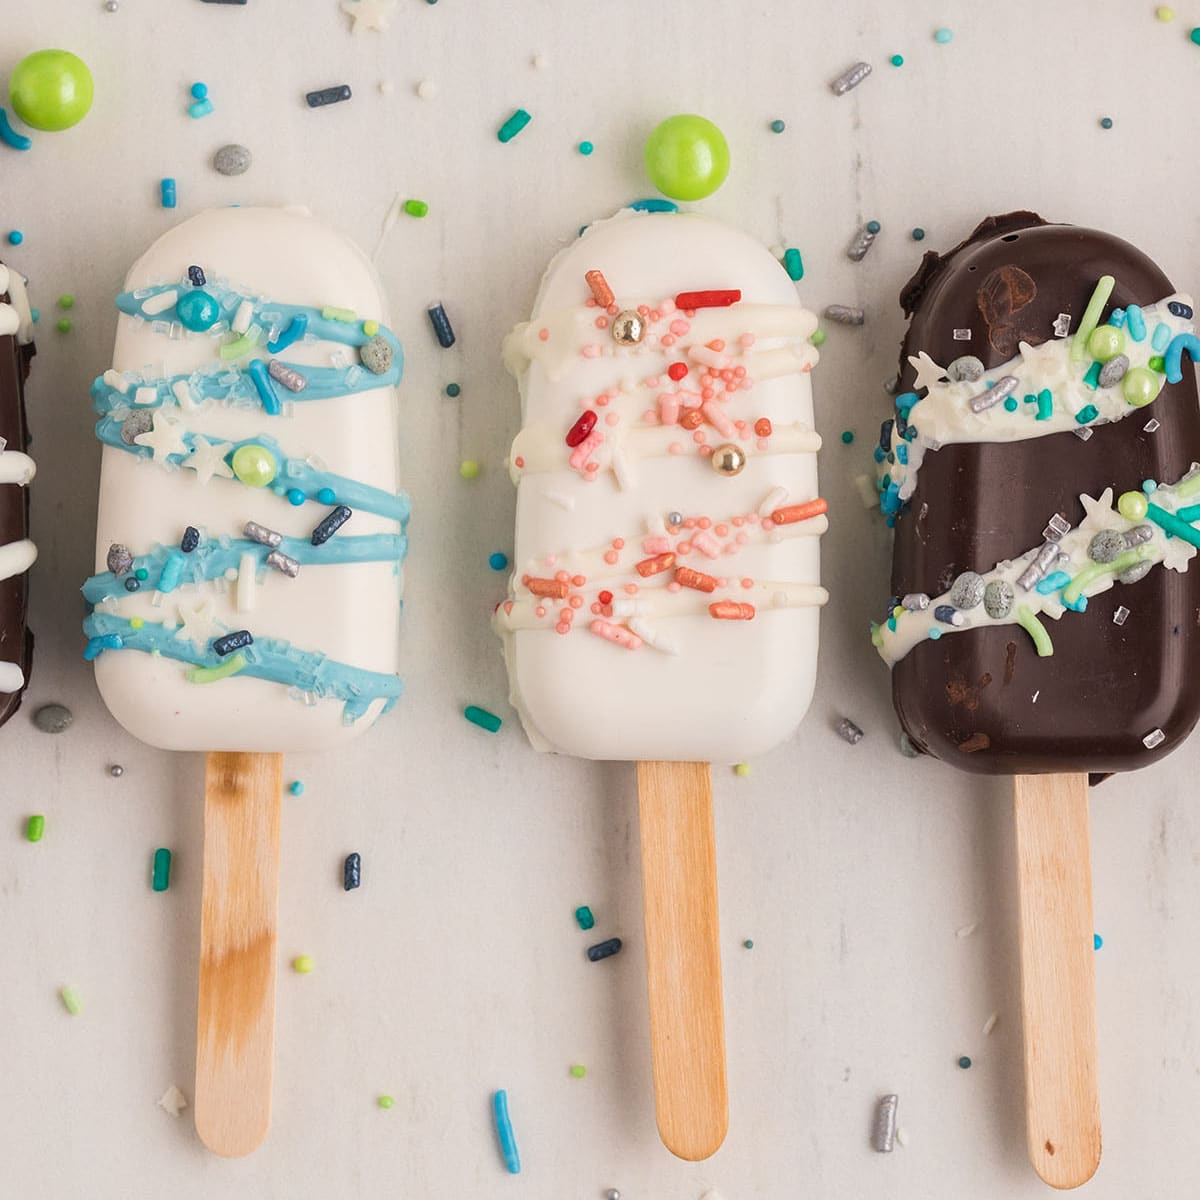 How to Make Cakesicles (Cake Popsicles Recipe!)